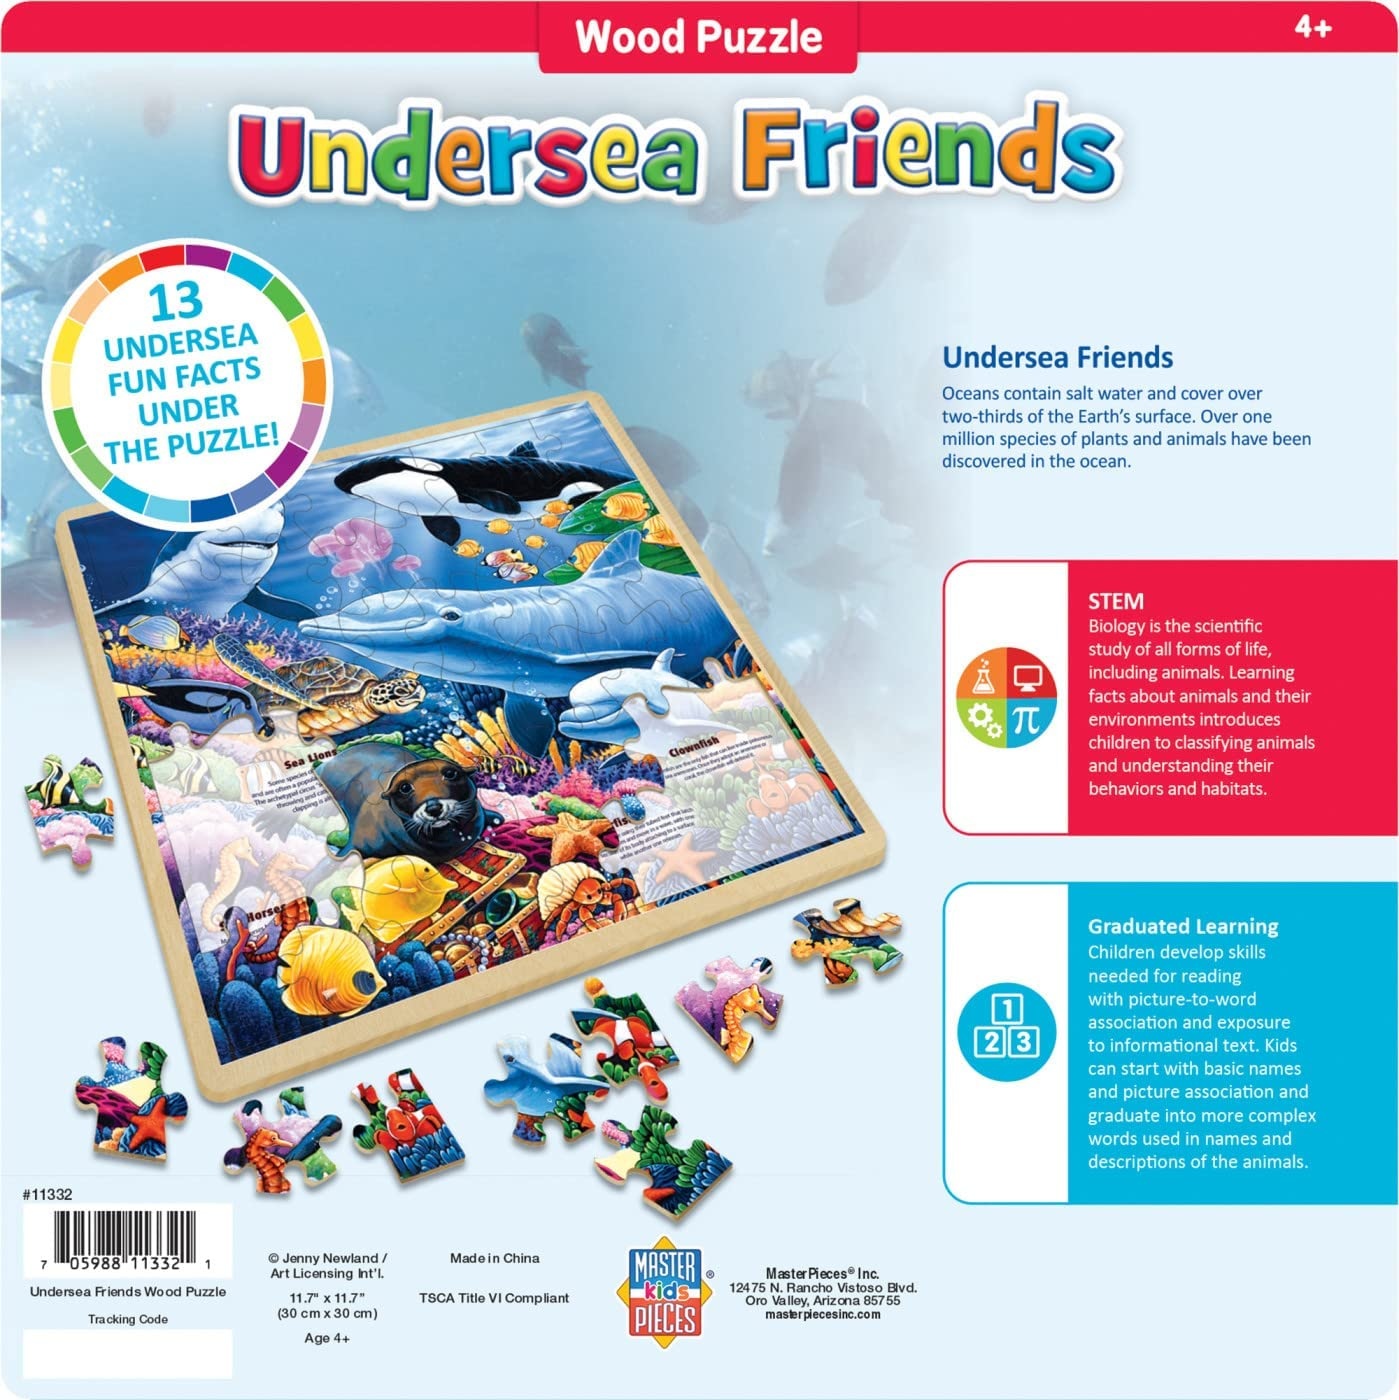 Masterpiece Wood Fun Facts - Undersea Friends 48pc Wood Puzzle